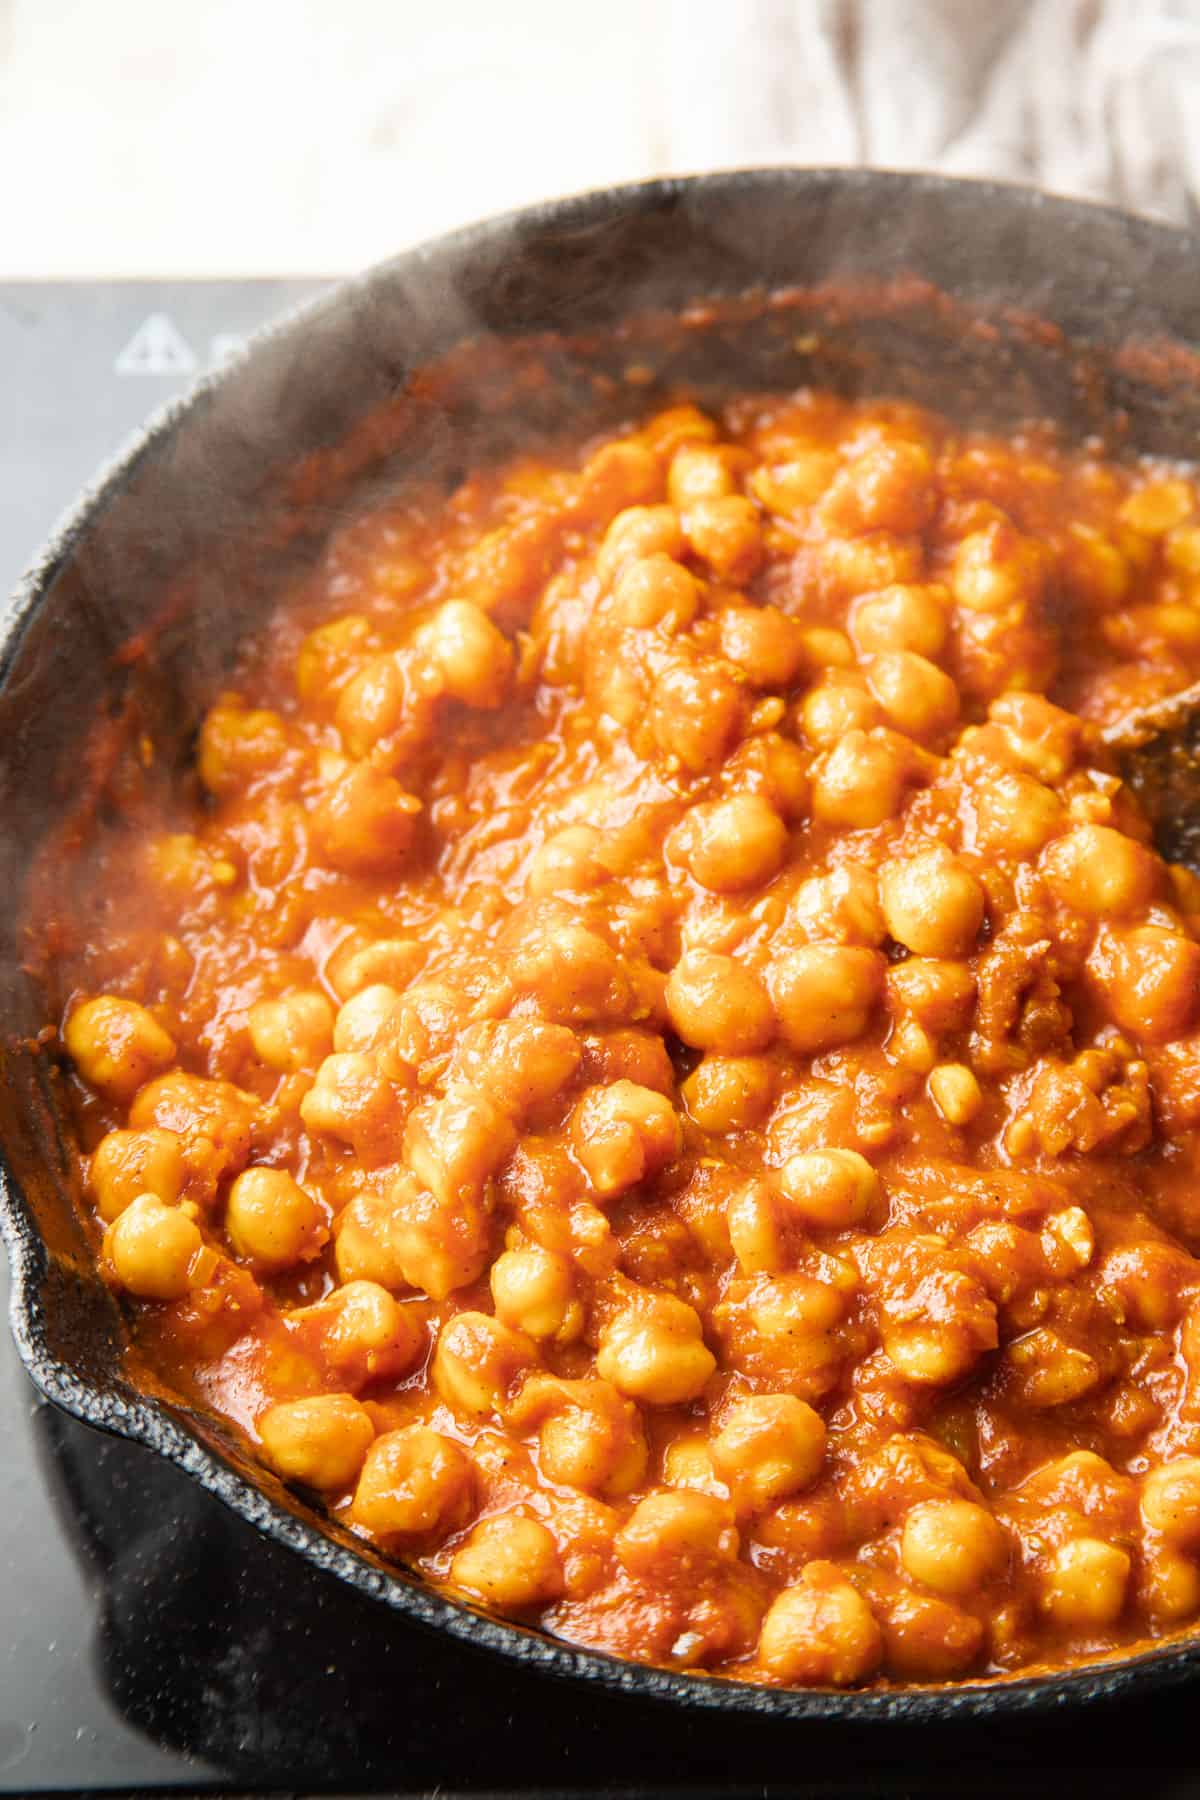 Chickpeas and tomato sauce simmering in a skillet.